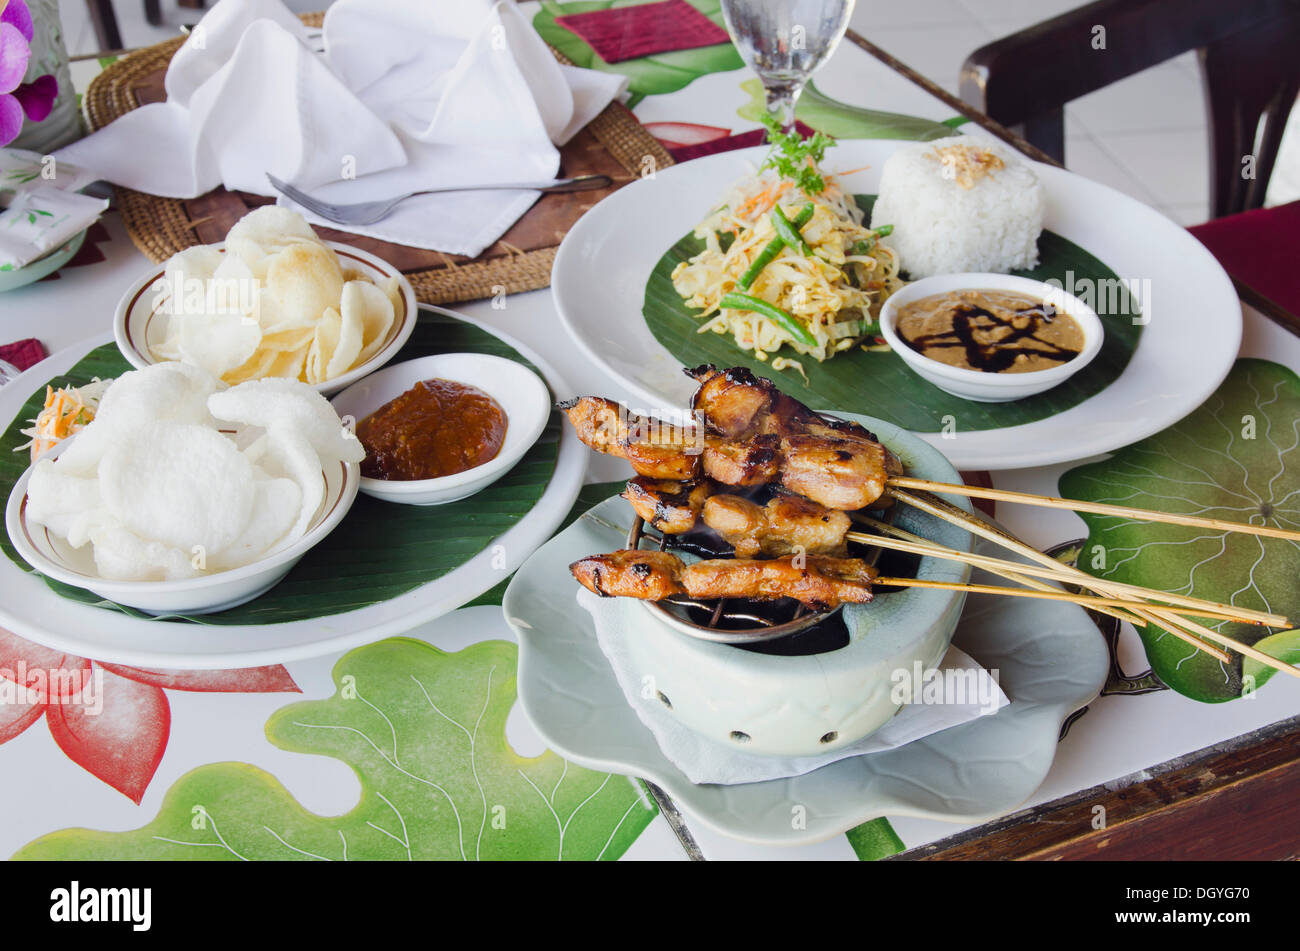 Chicken satay, chicken skewers with rice, Indonesian cuisine, at a restaurant, Candi Dasa, Bali, Indonesia Stock Photo